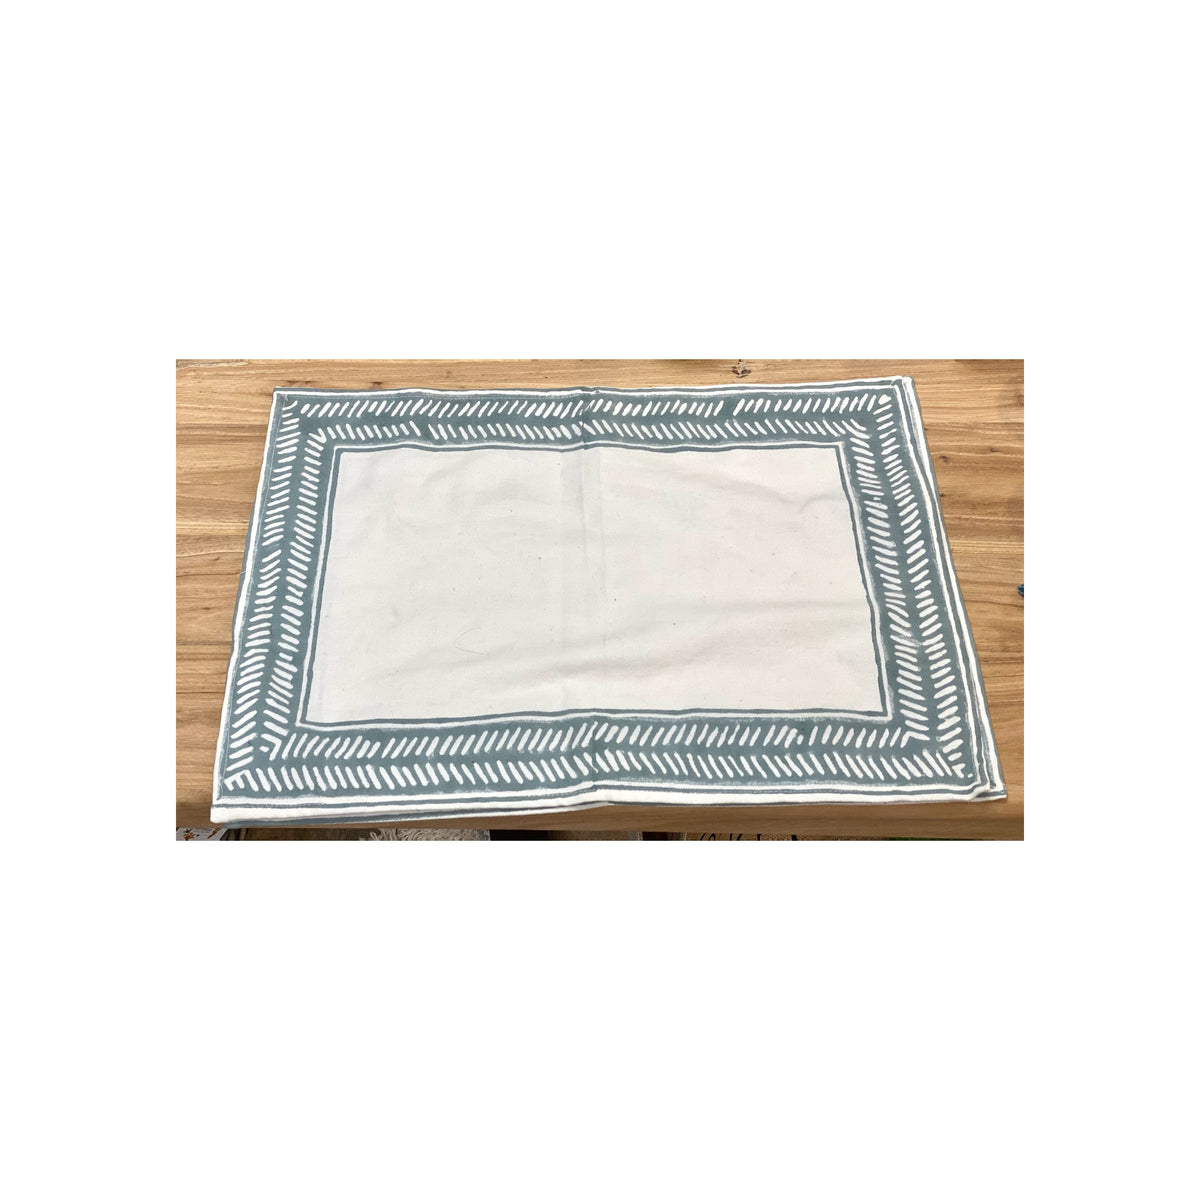 Cotton Placemat- Seagreen & White Boarder